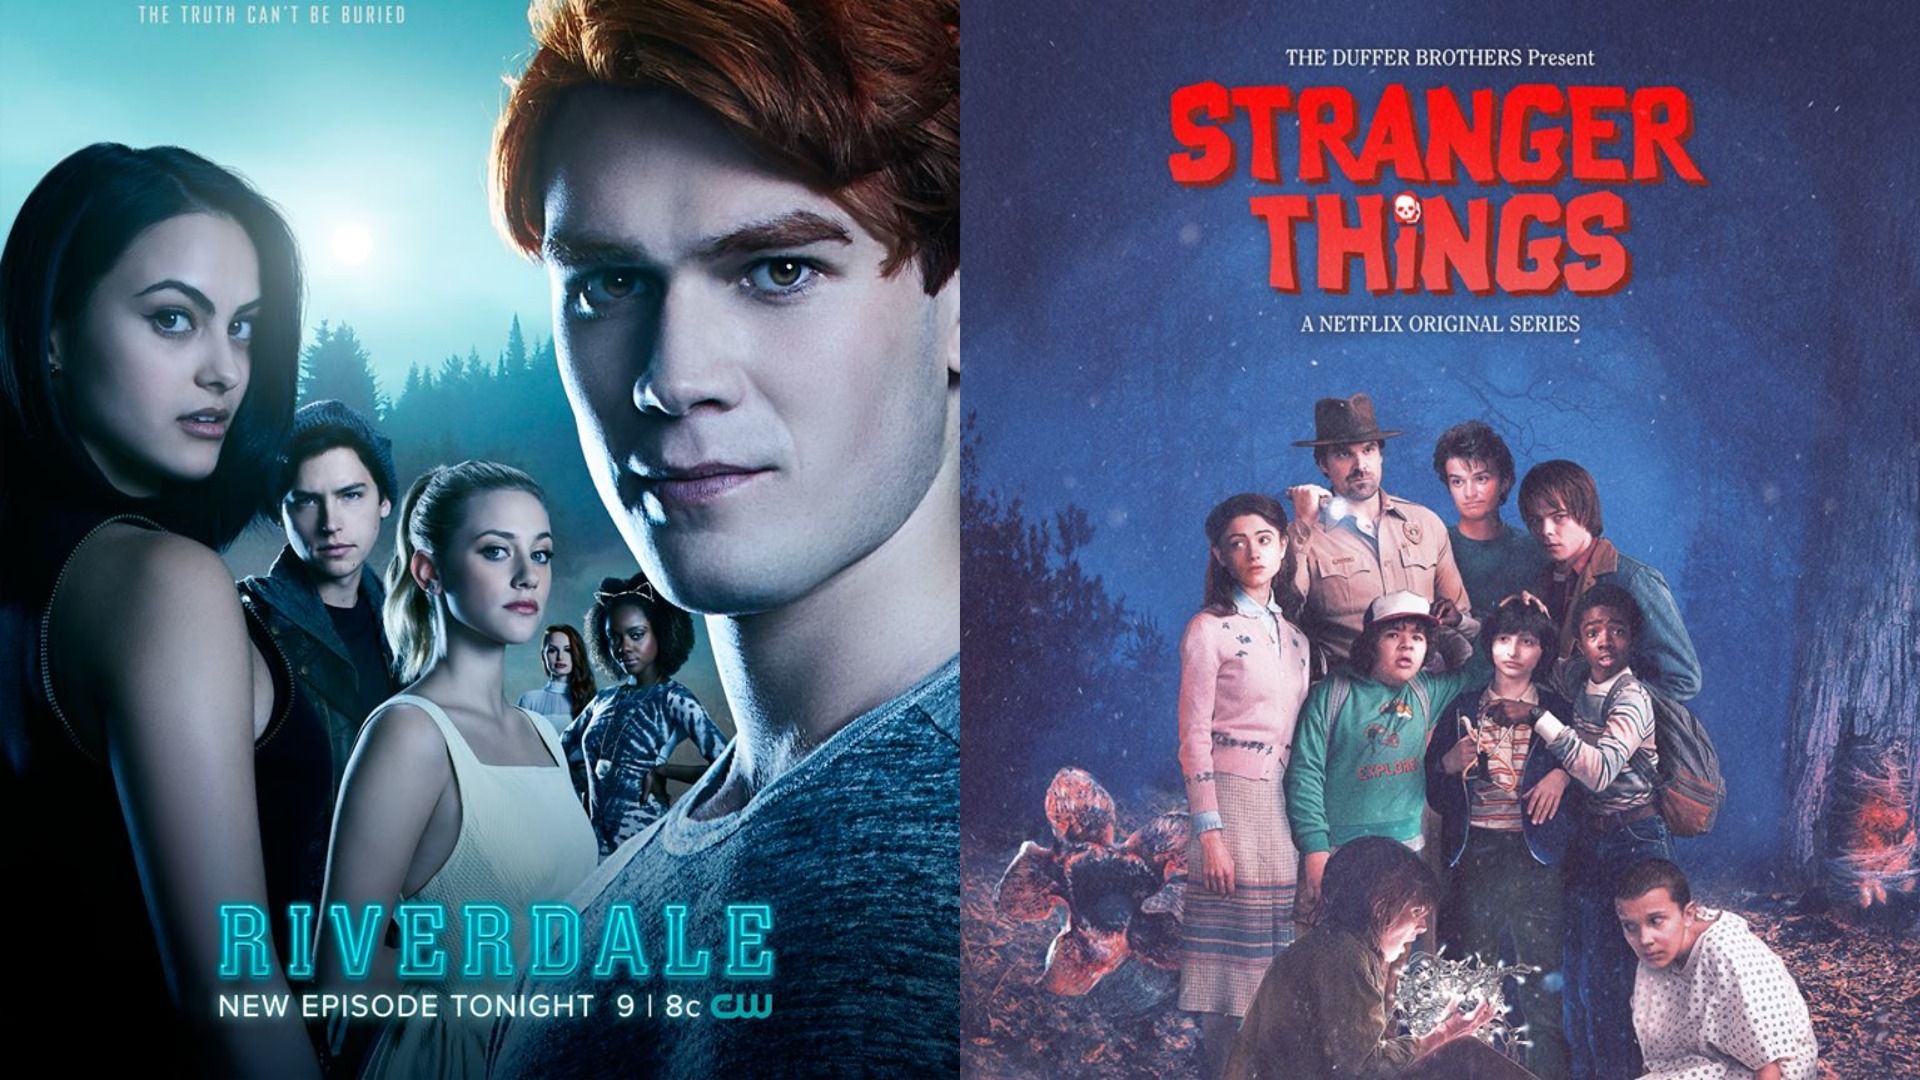 Let's do a Riverdale and Stranger Things crossover